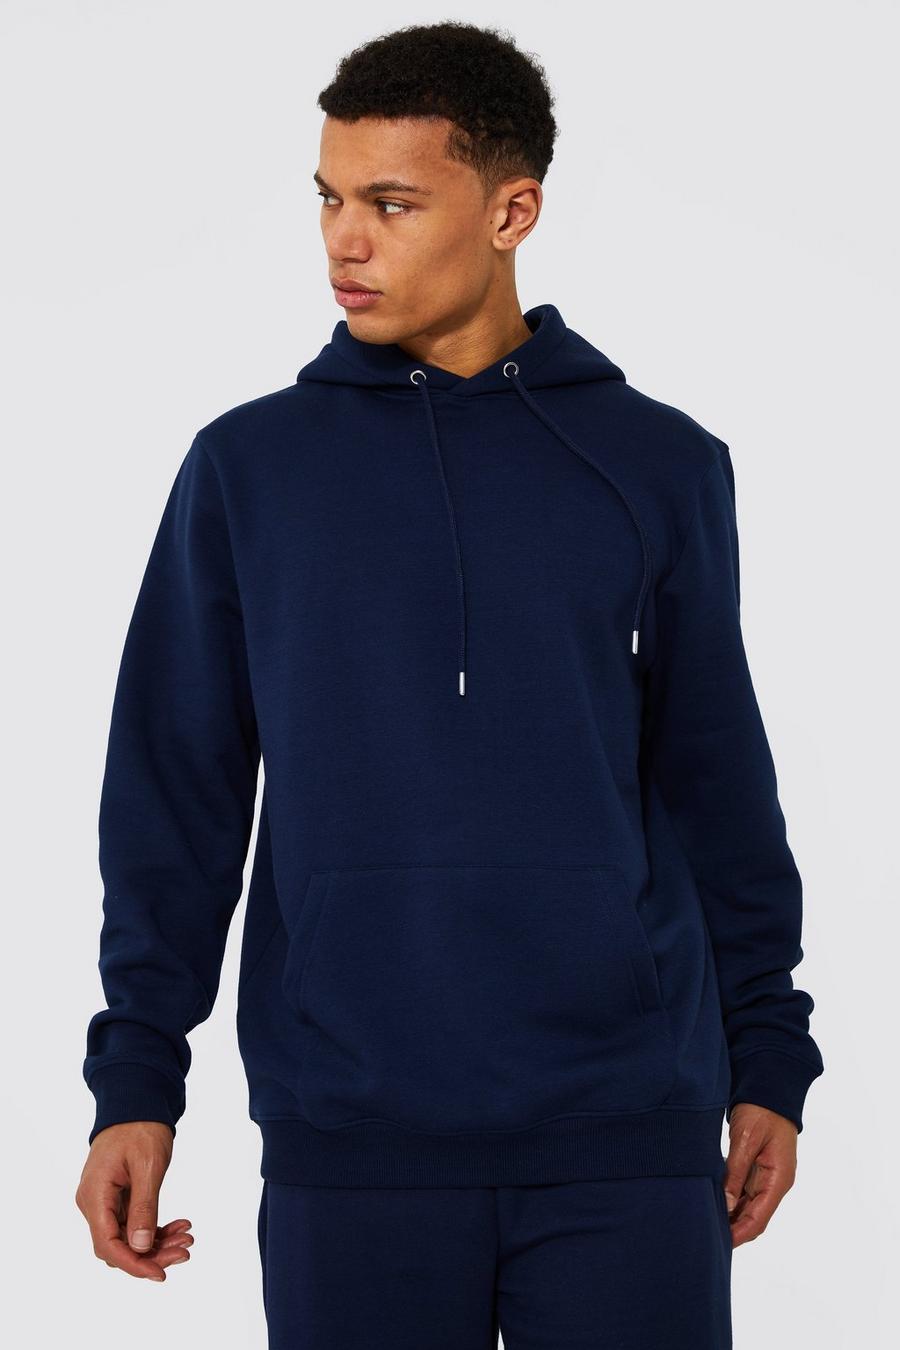 Navy Tall Basic Regular Fit Over The Head Hoodie